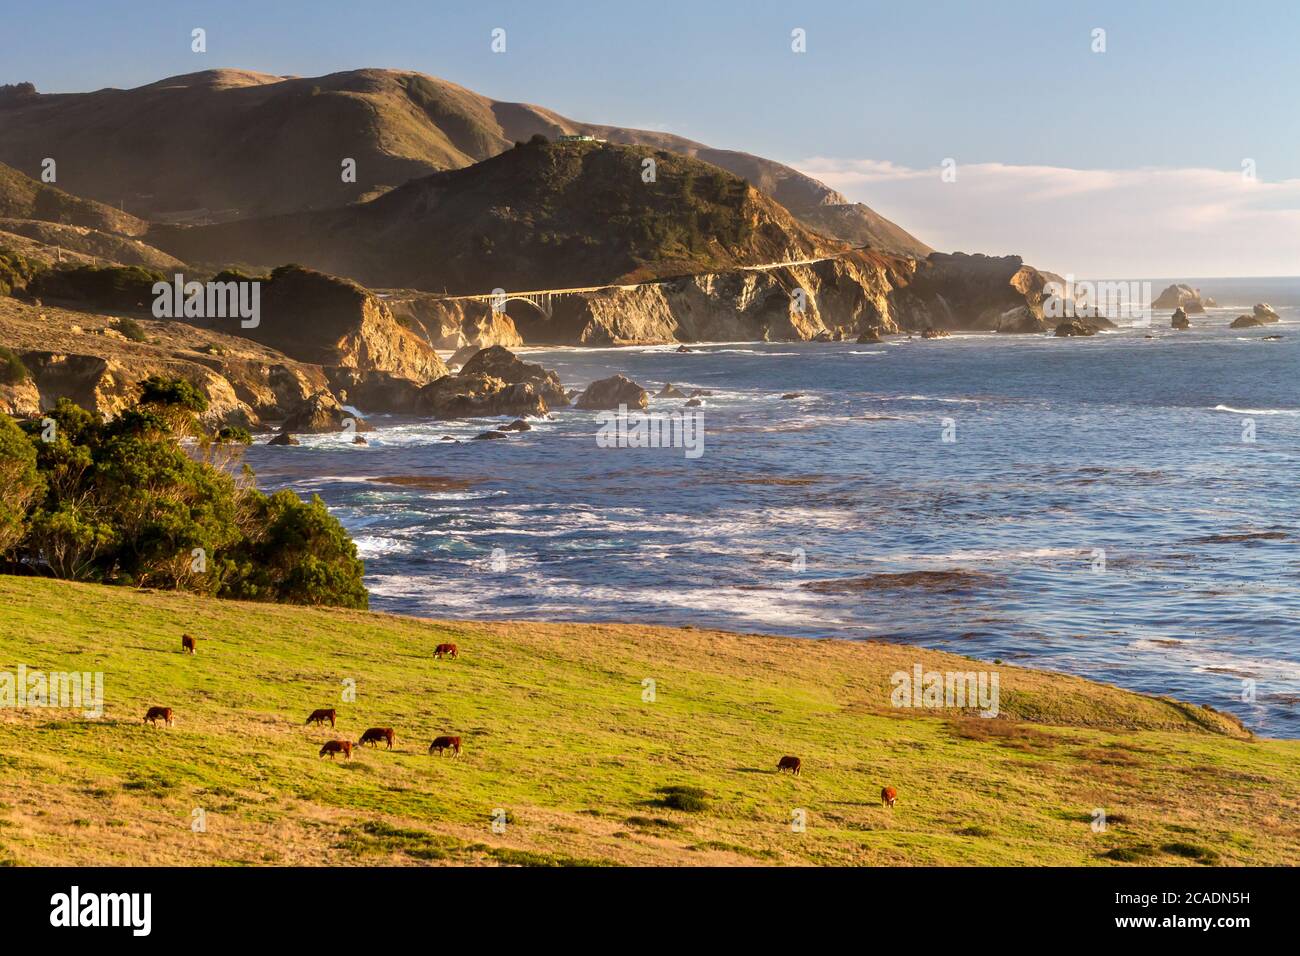 Happy Cows - Cattle graze in an oceanside pasture with CA-1 passing over the Rocky Creek Bridge in the background. Notleys Landing, California, USA Stock Photo